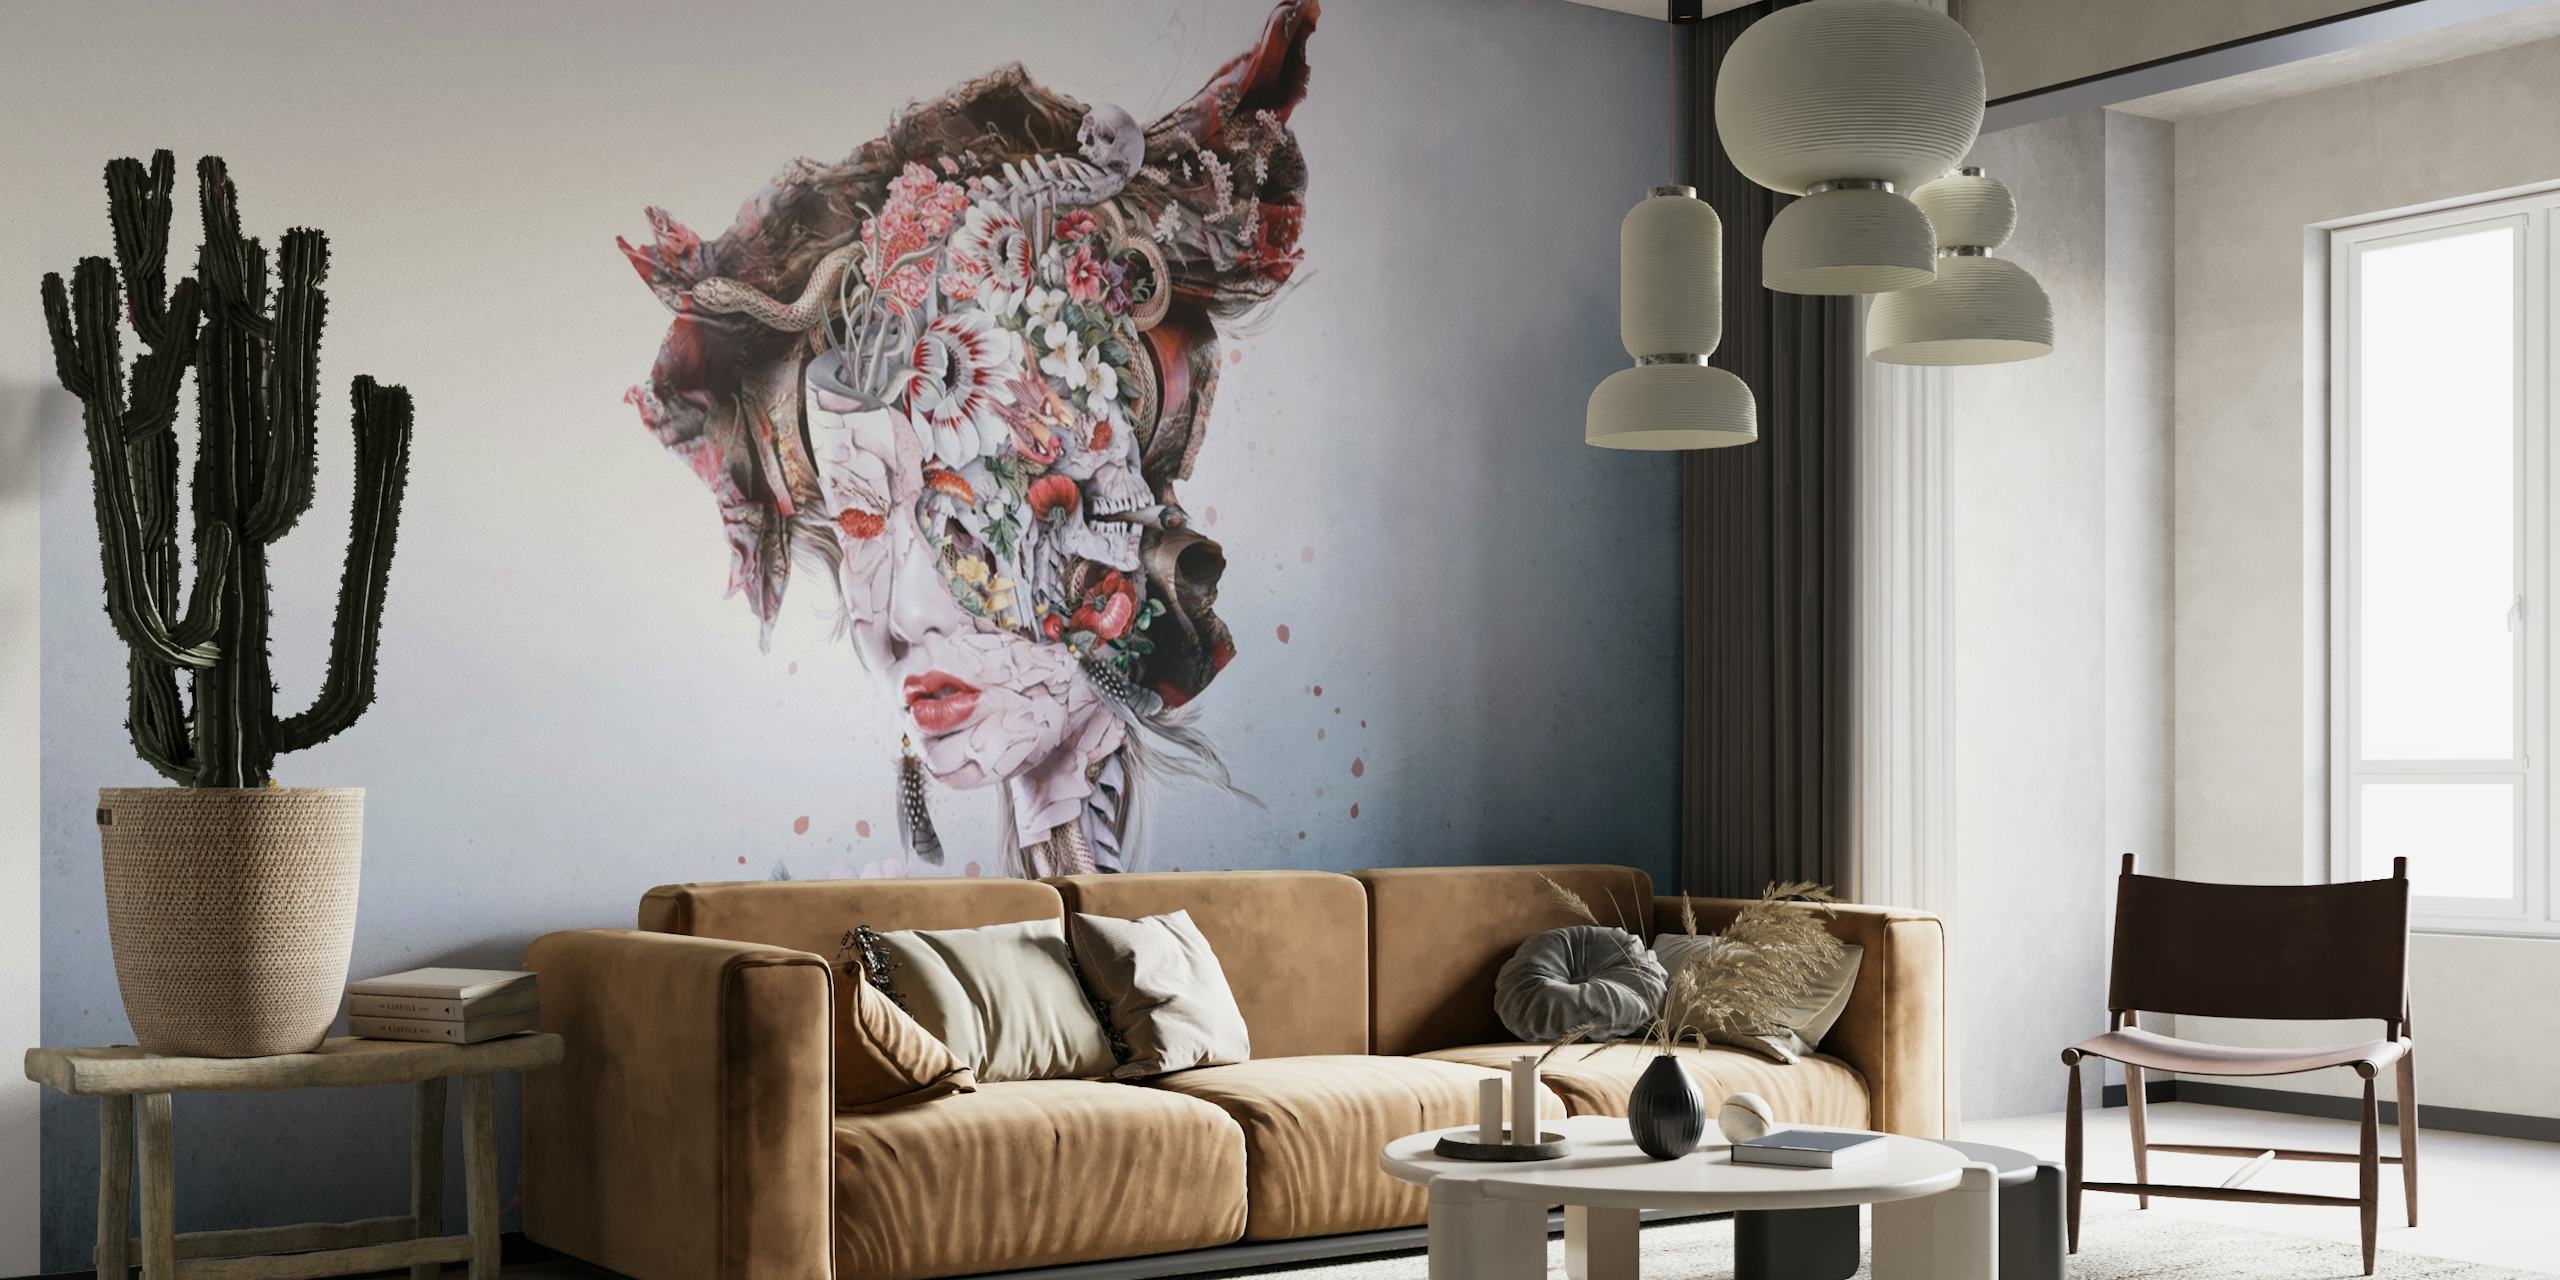 Artistic wall mural depicting a surreal queen surrounded by flowers